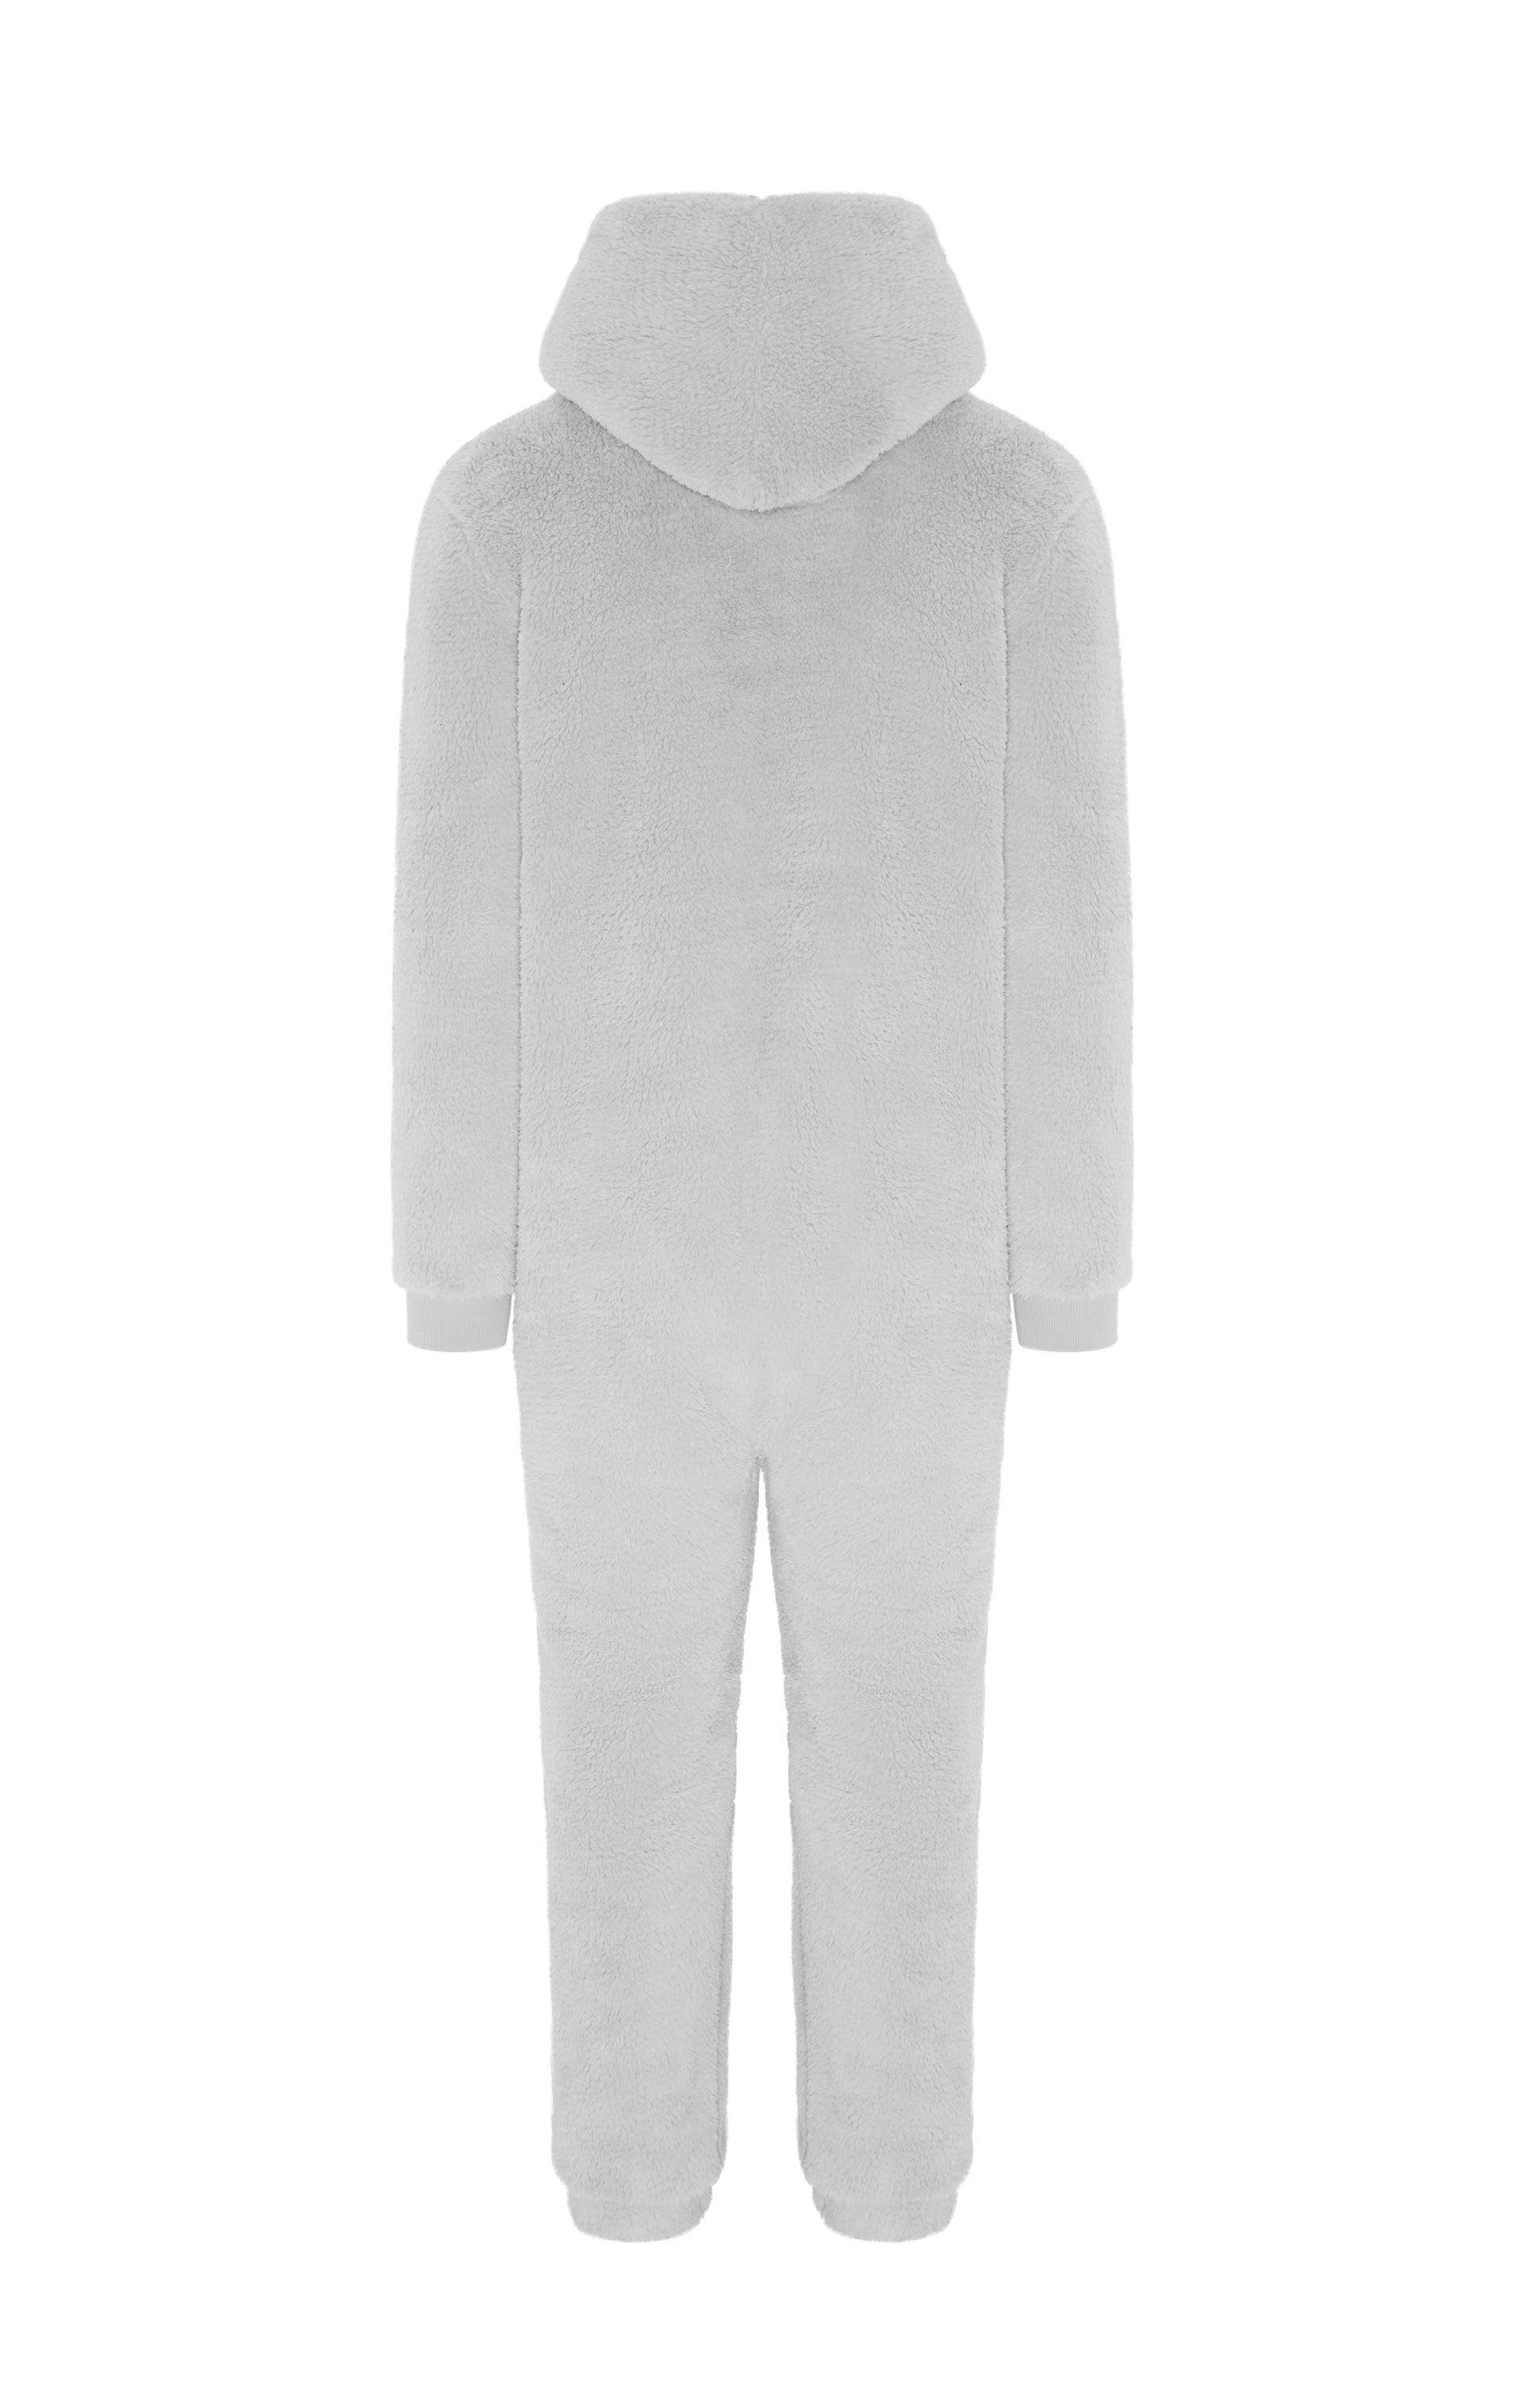 The Puppy Jumpsuit Light Grey - Onepiece